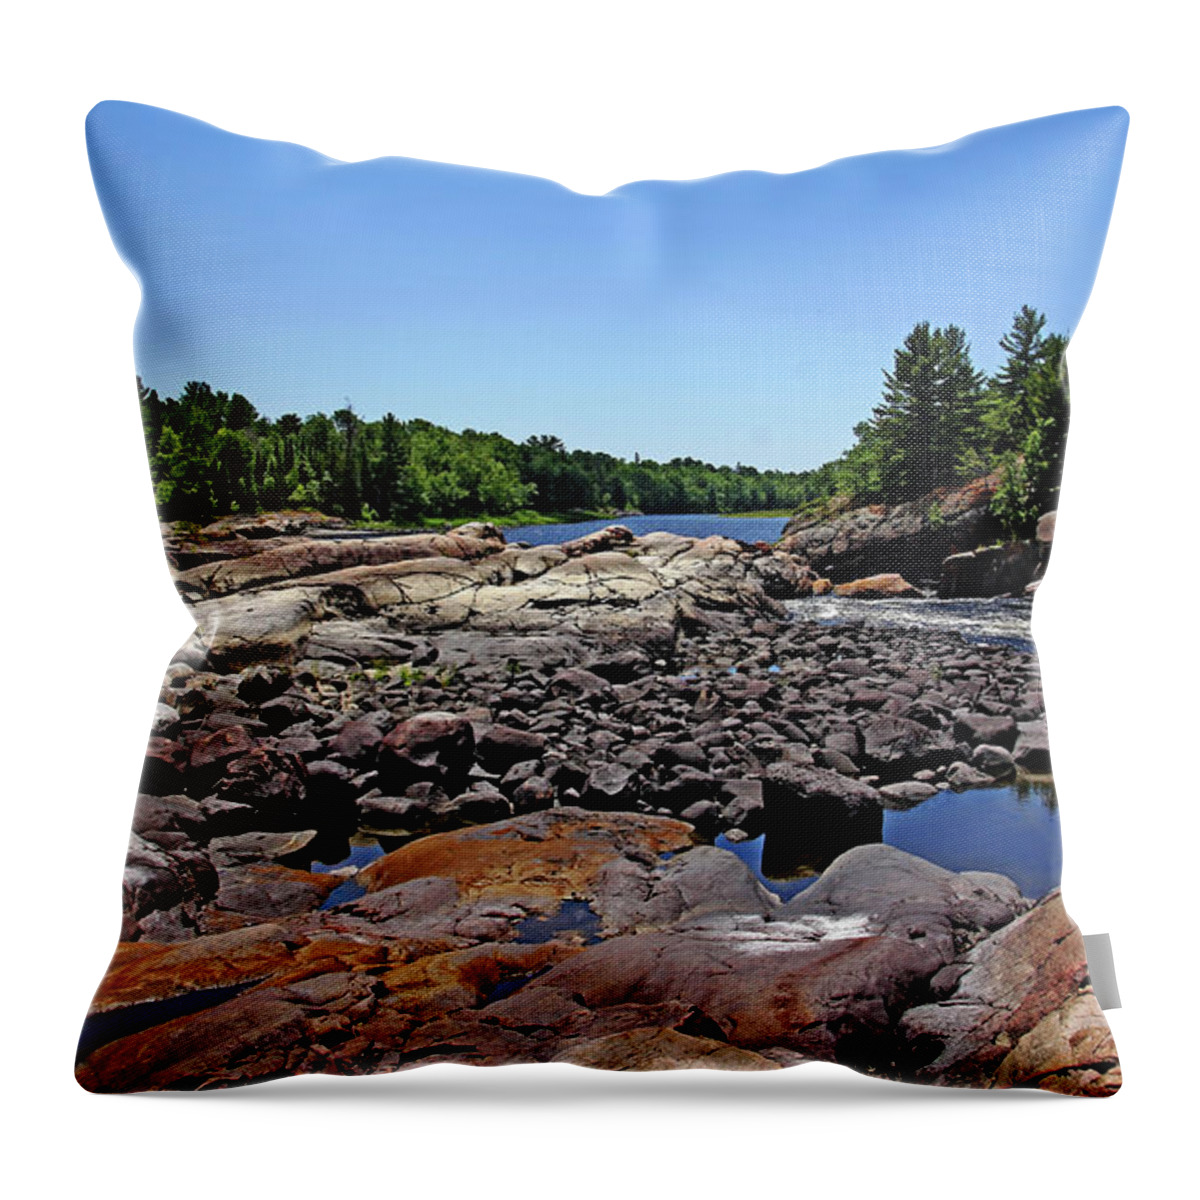 Sturgeon Chutes Throw Pillow featuring the photograph Untamed Wilderness by Debbie Oppermann